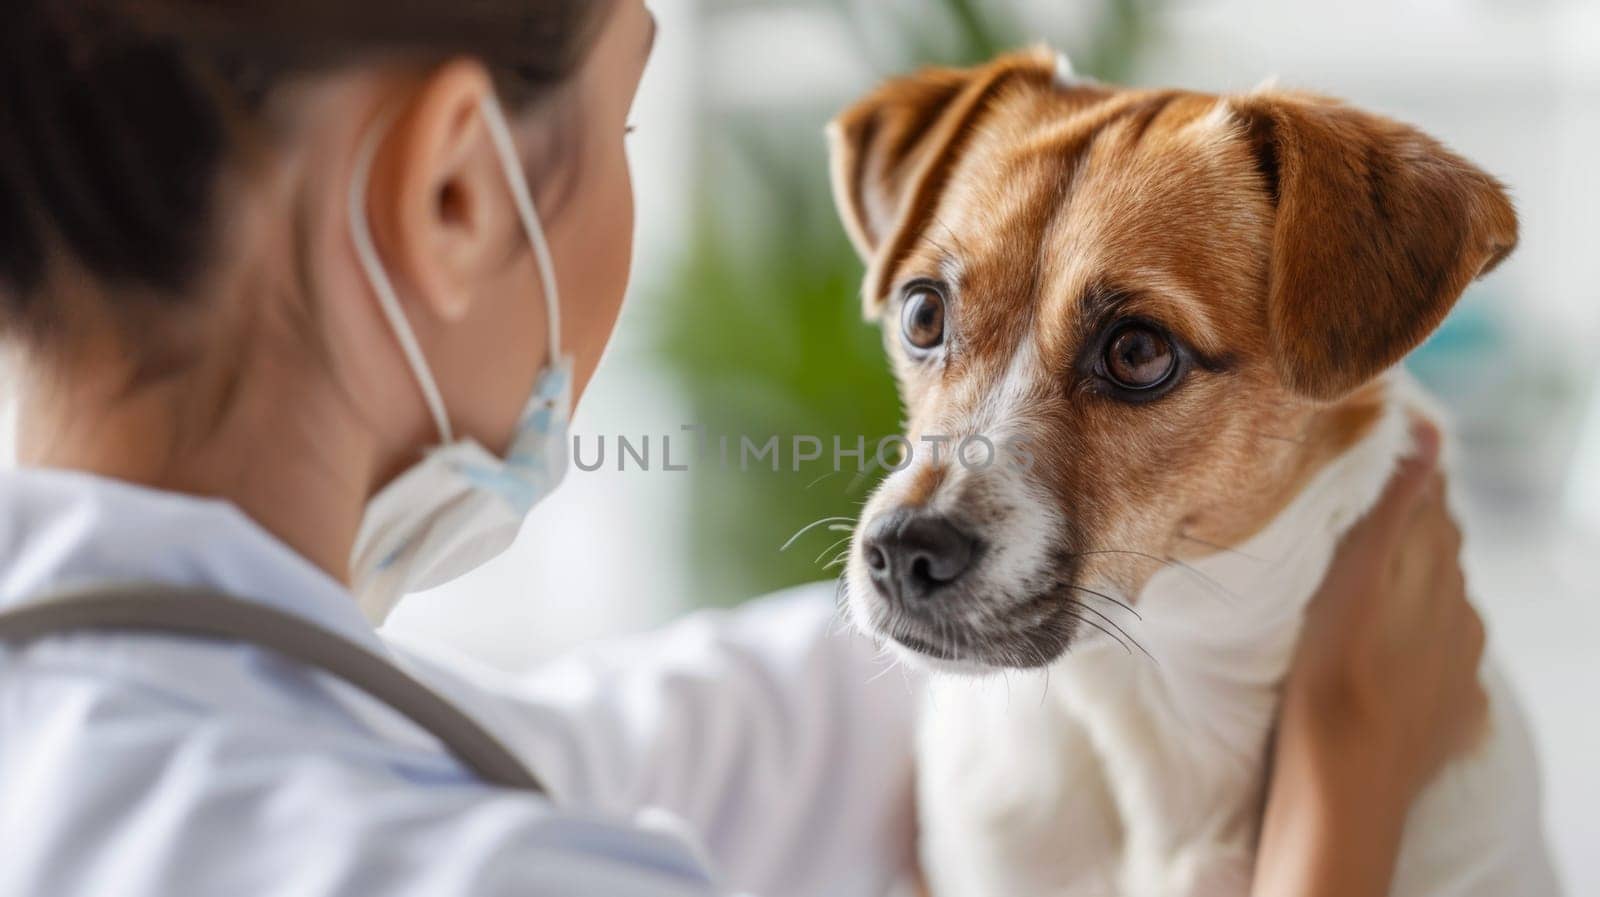 A woman holding a dog while wearing a stethoscope, AI by starush